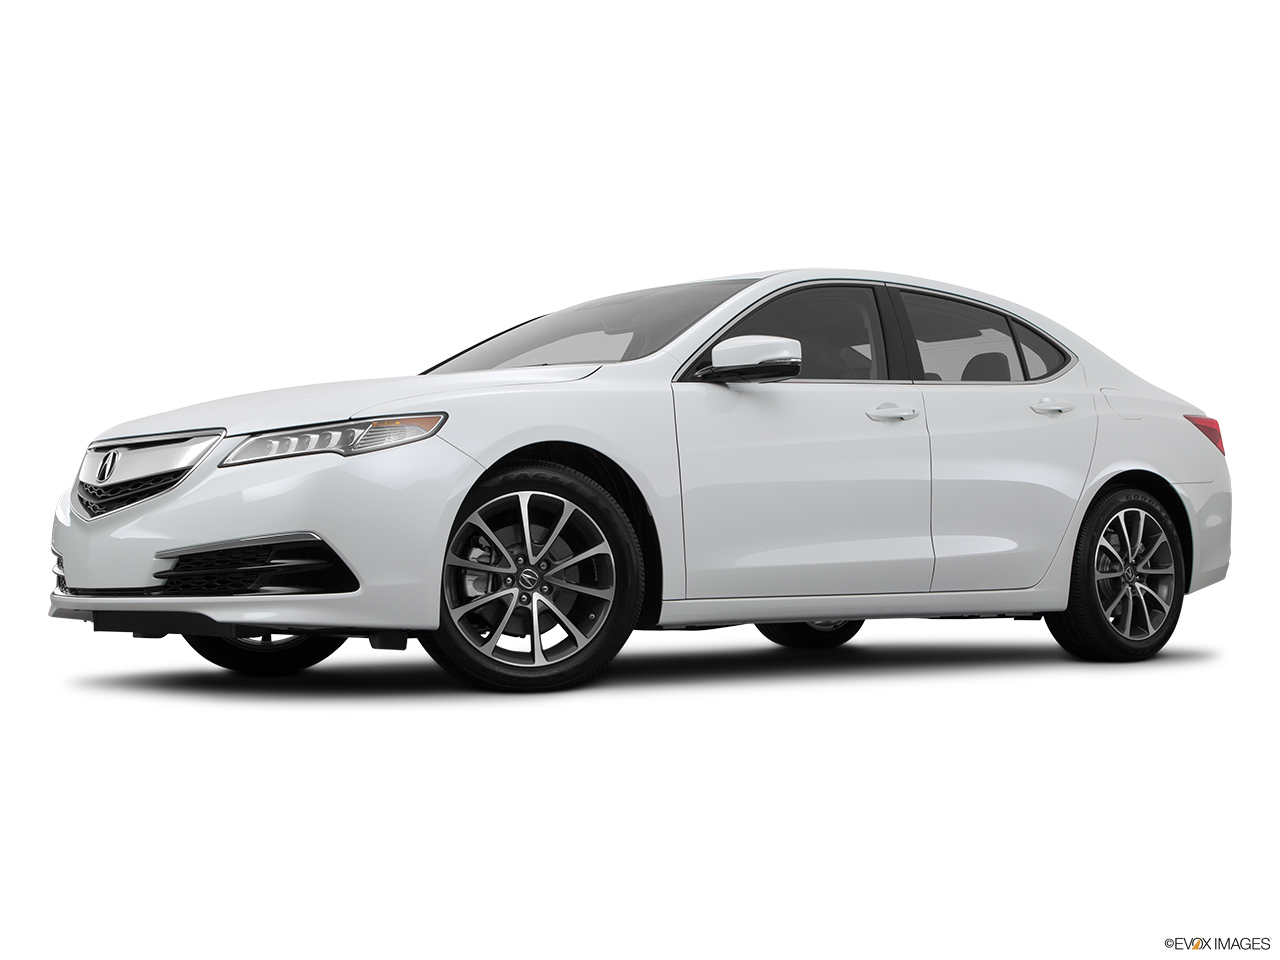 2015 Acura TLX 3.5 V-6 9-AT SH-AWD Low/wide front 5/8. 